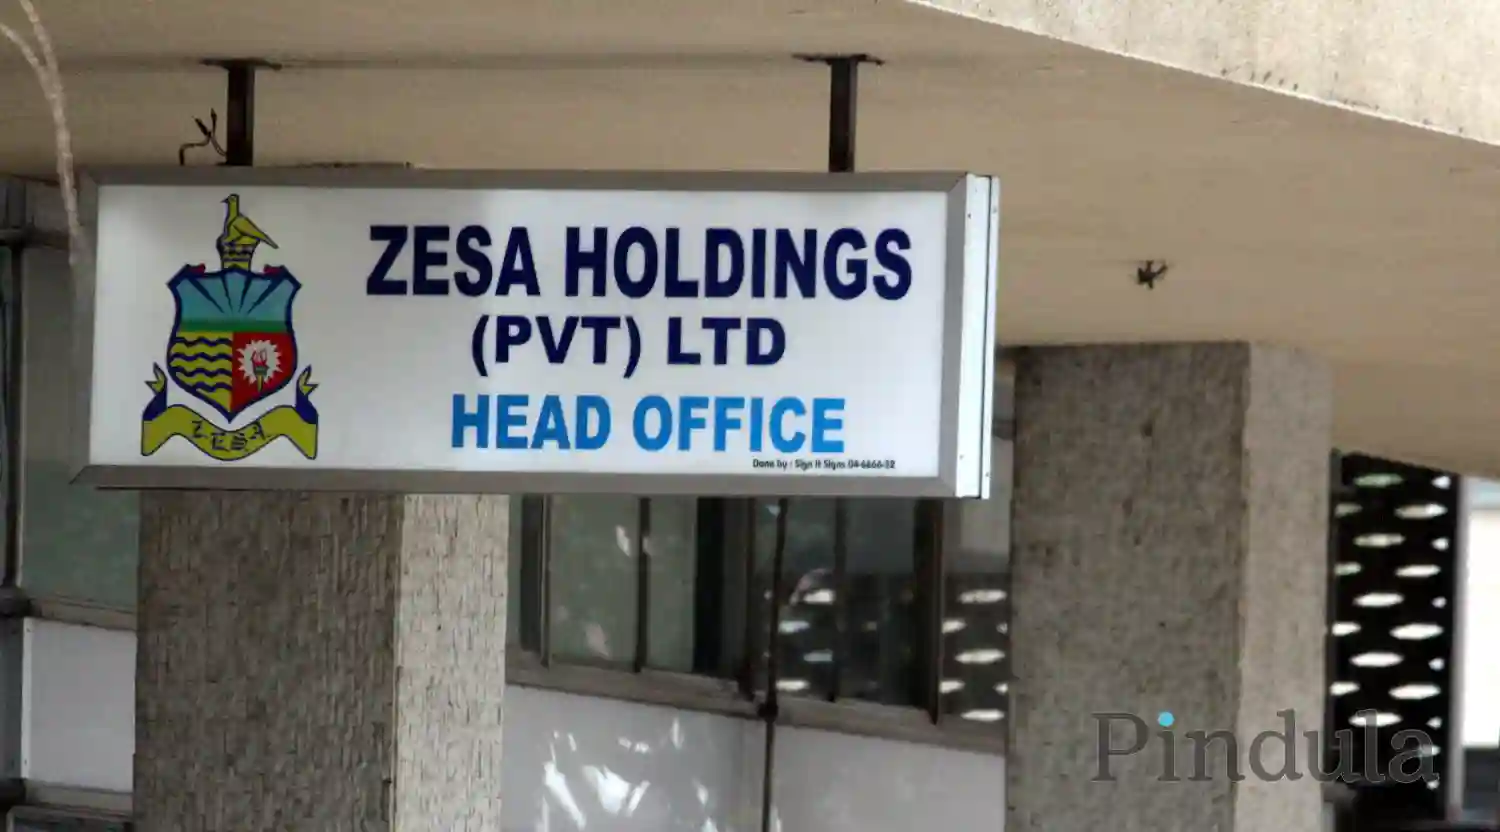 Auditor-General Exposes Serious Maladministration Issues At ZESA